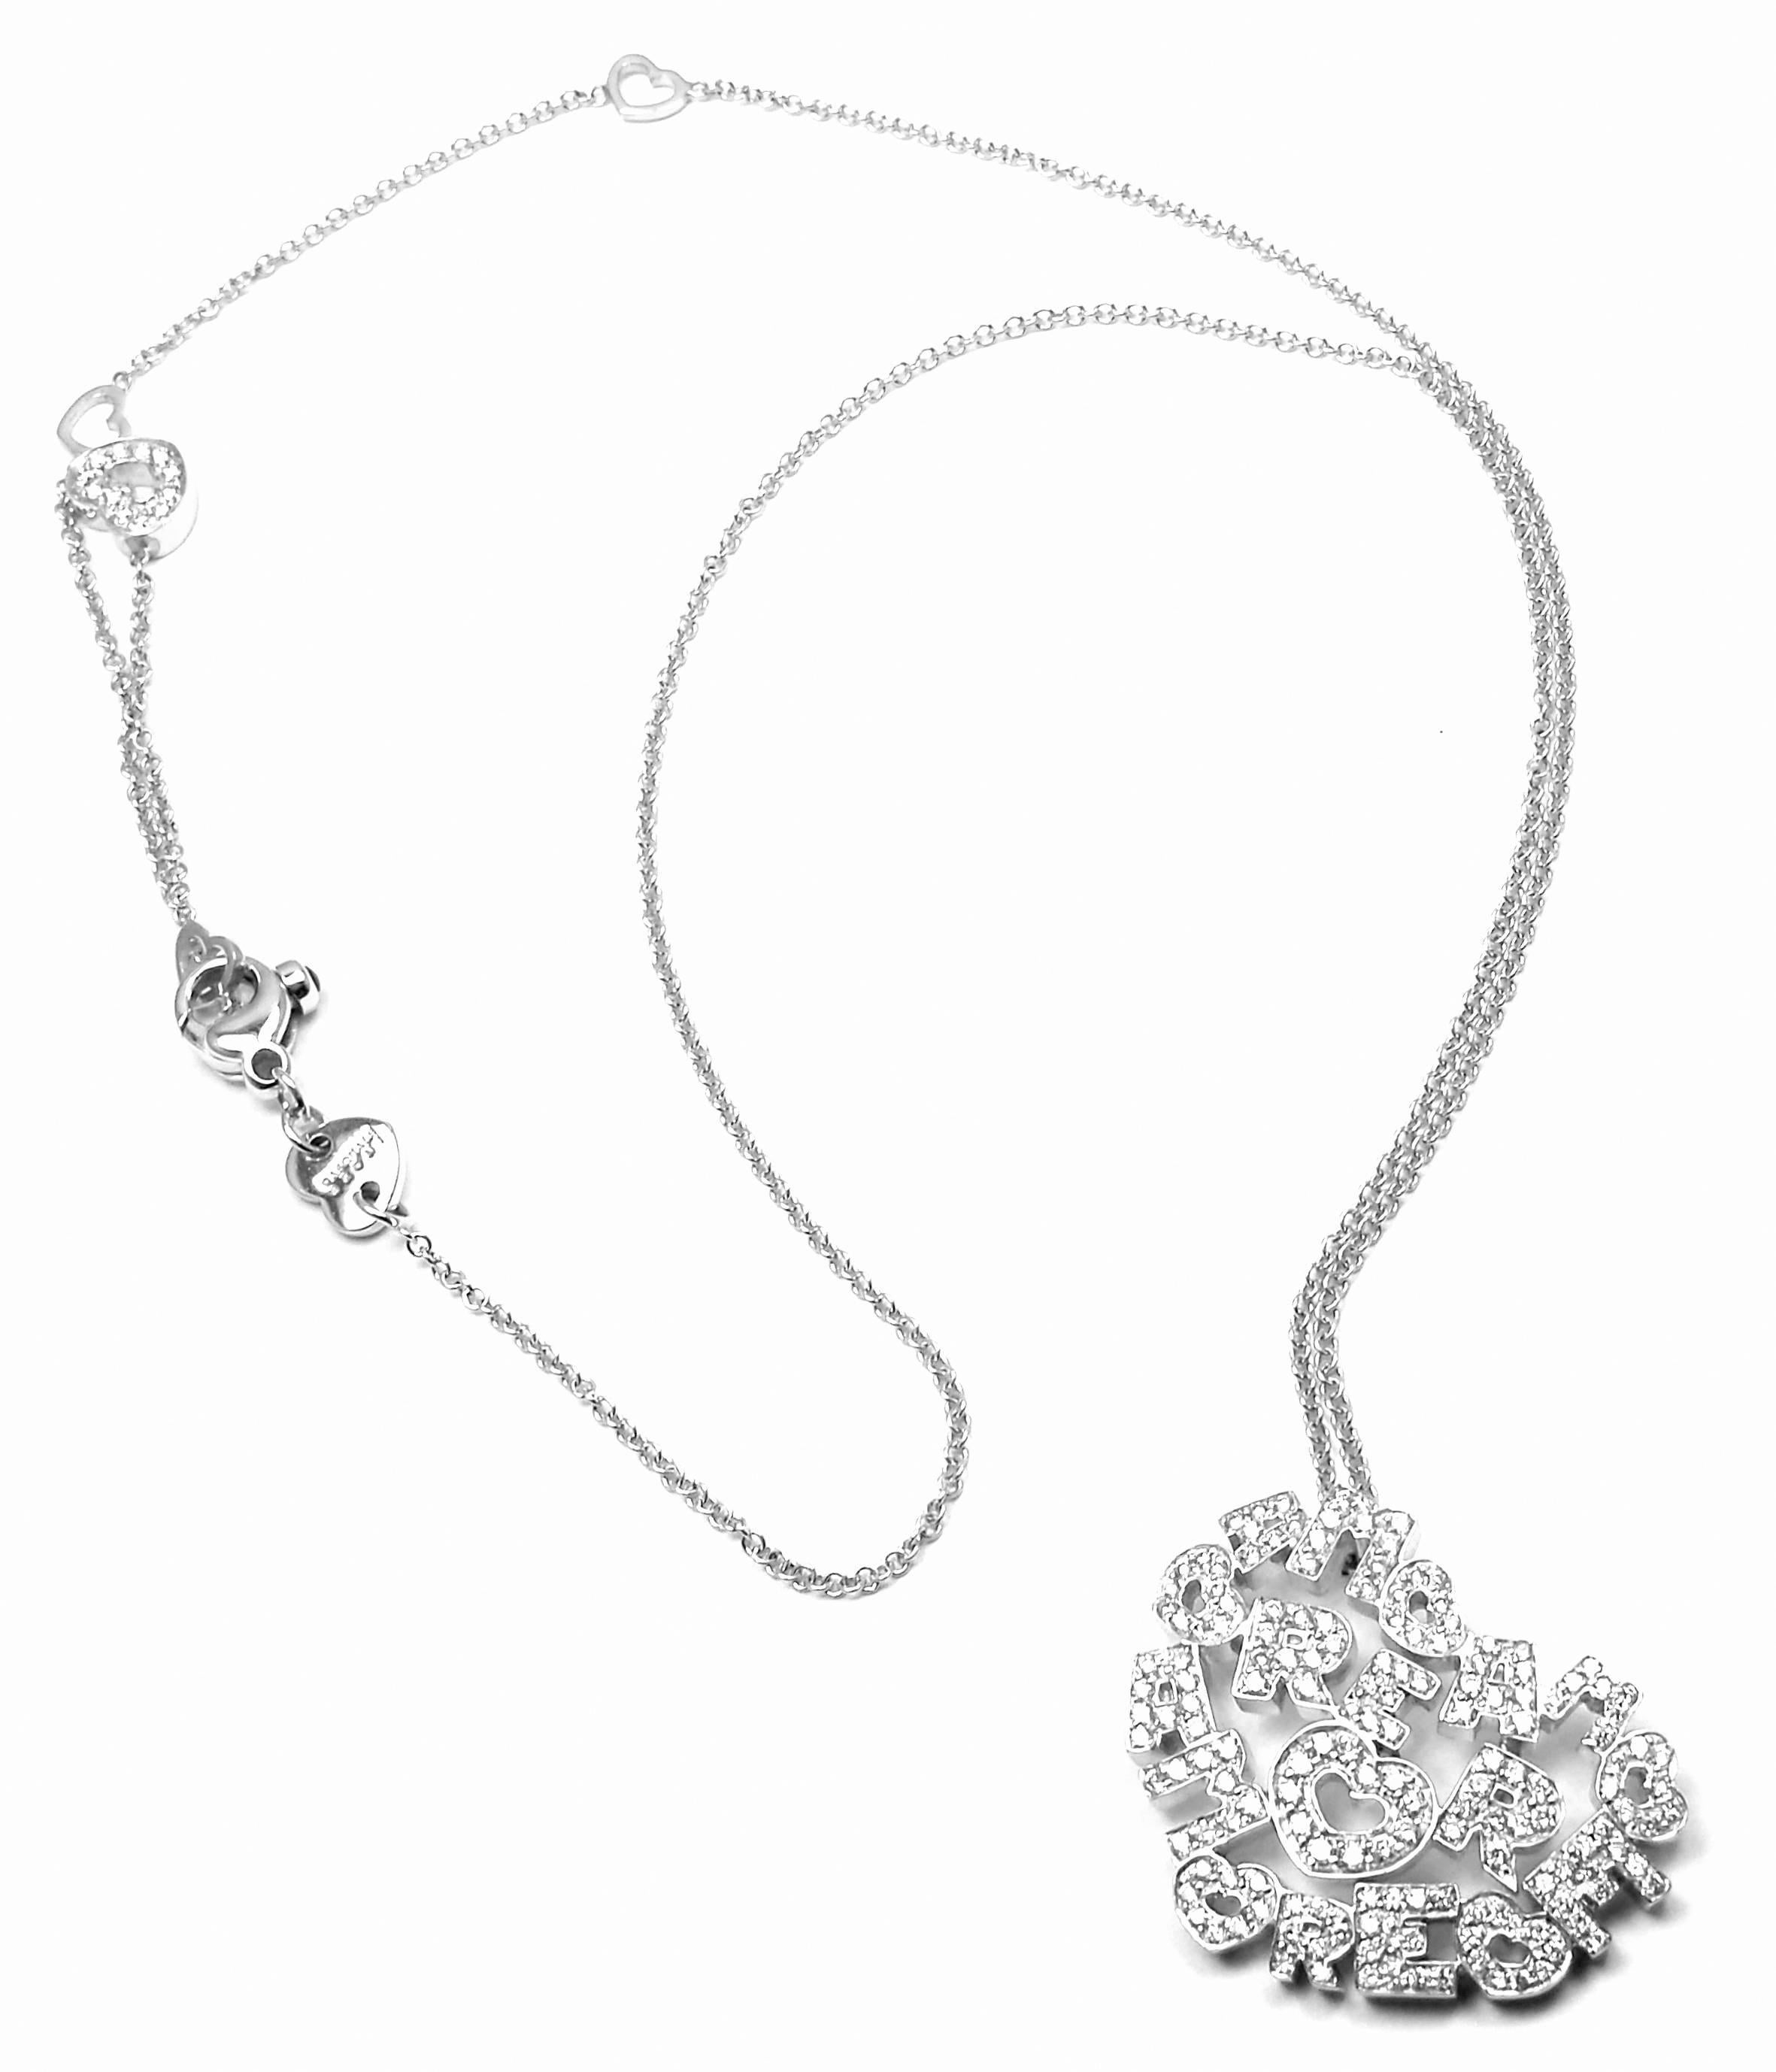 18k White Gold Amore Diamond Heart Shape Pendant Necklace
by Pasquale Bruni.
With Round brilliant cut diamonds VS1 clarity, G color total weight approx. 1.02ct, sapphire stones (other): .06ct
This necklace comes with Box, Certificate and